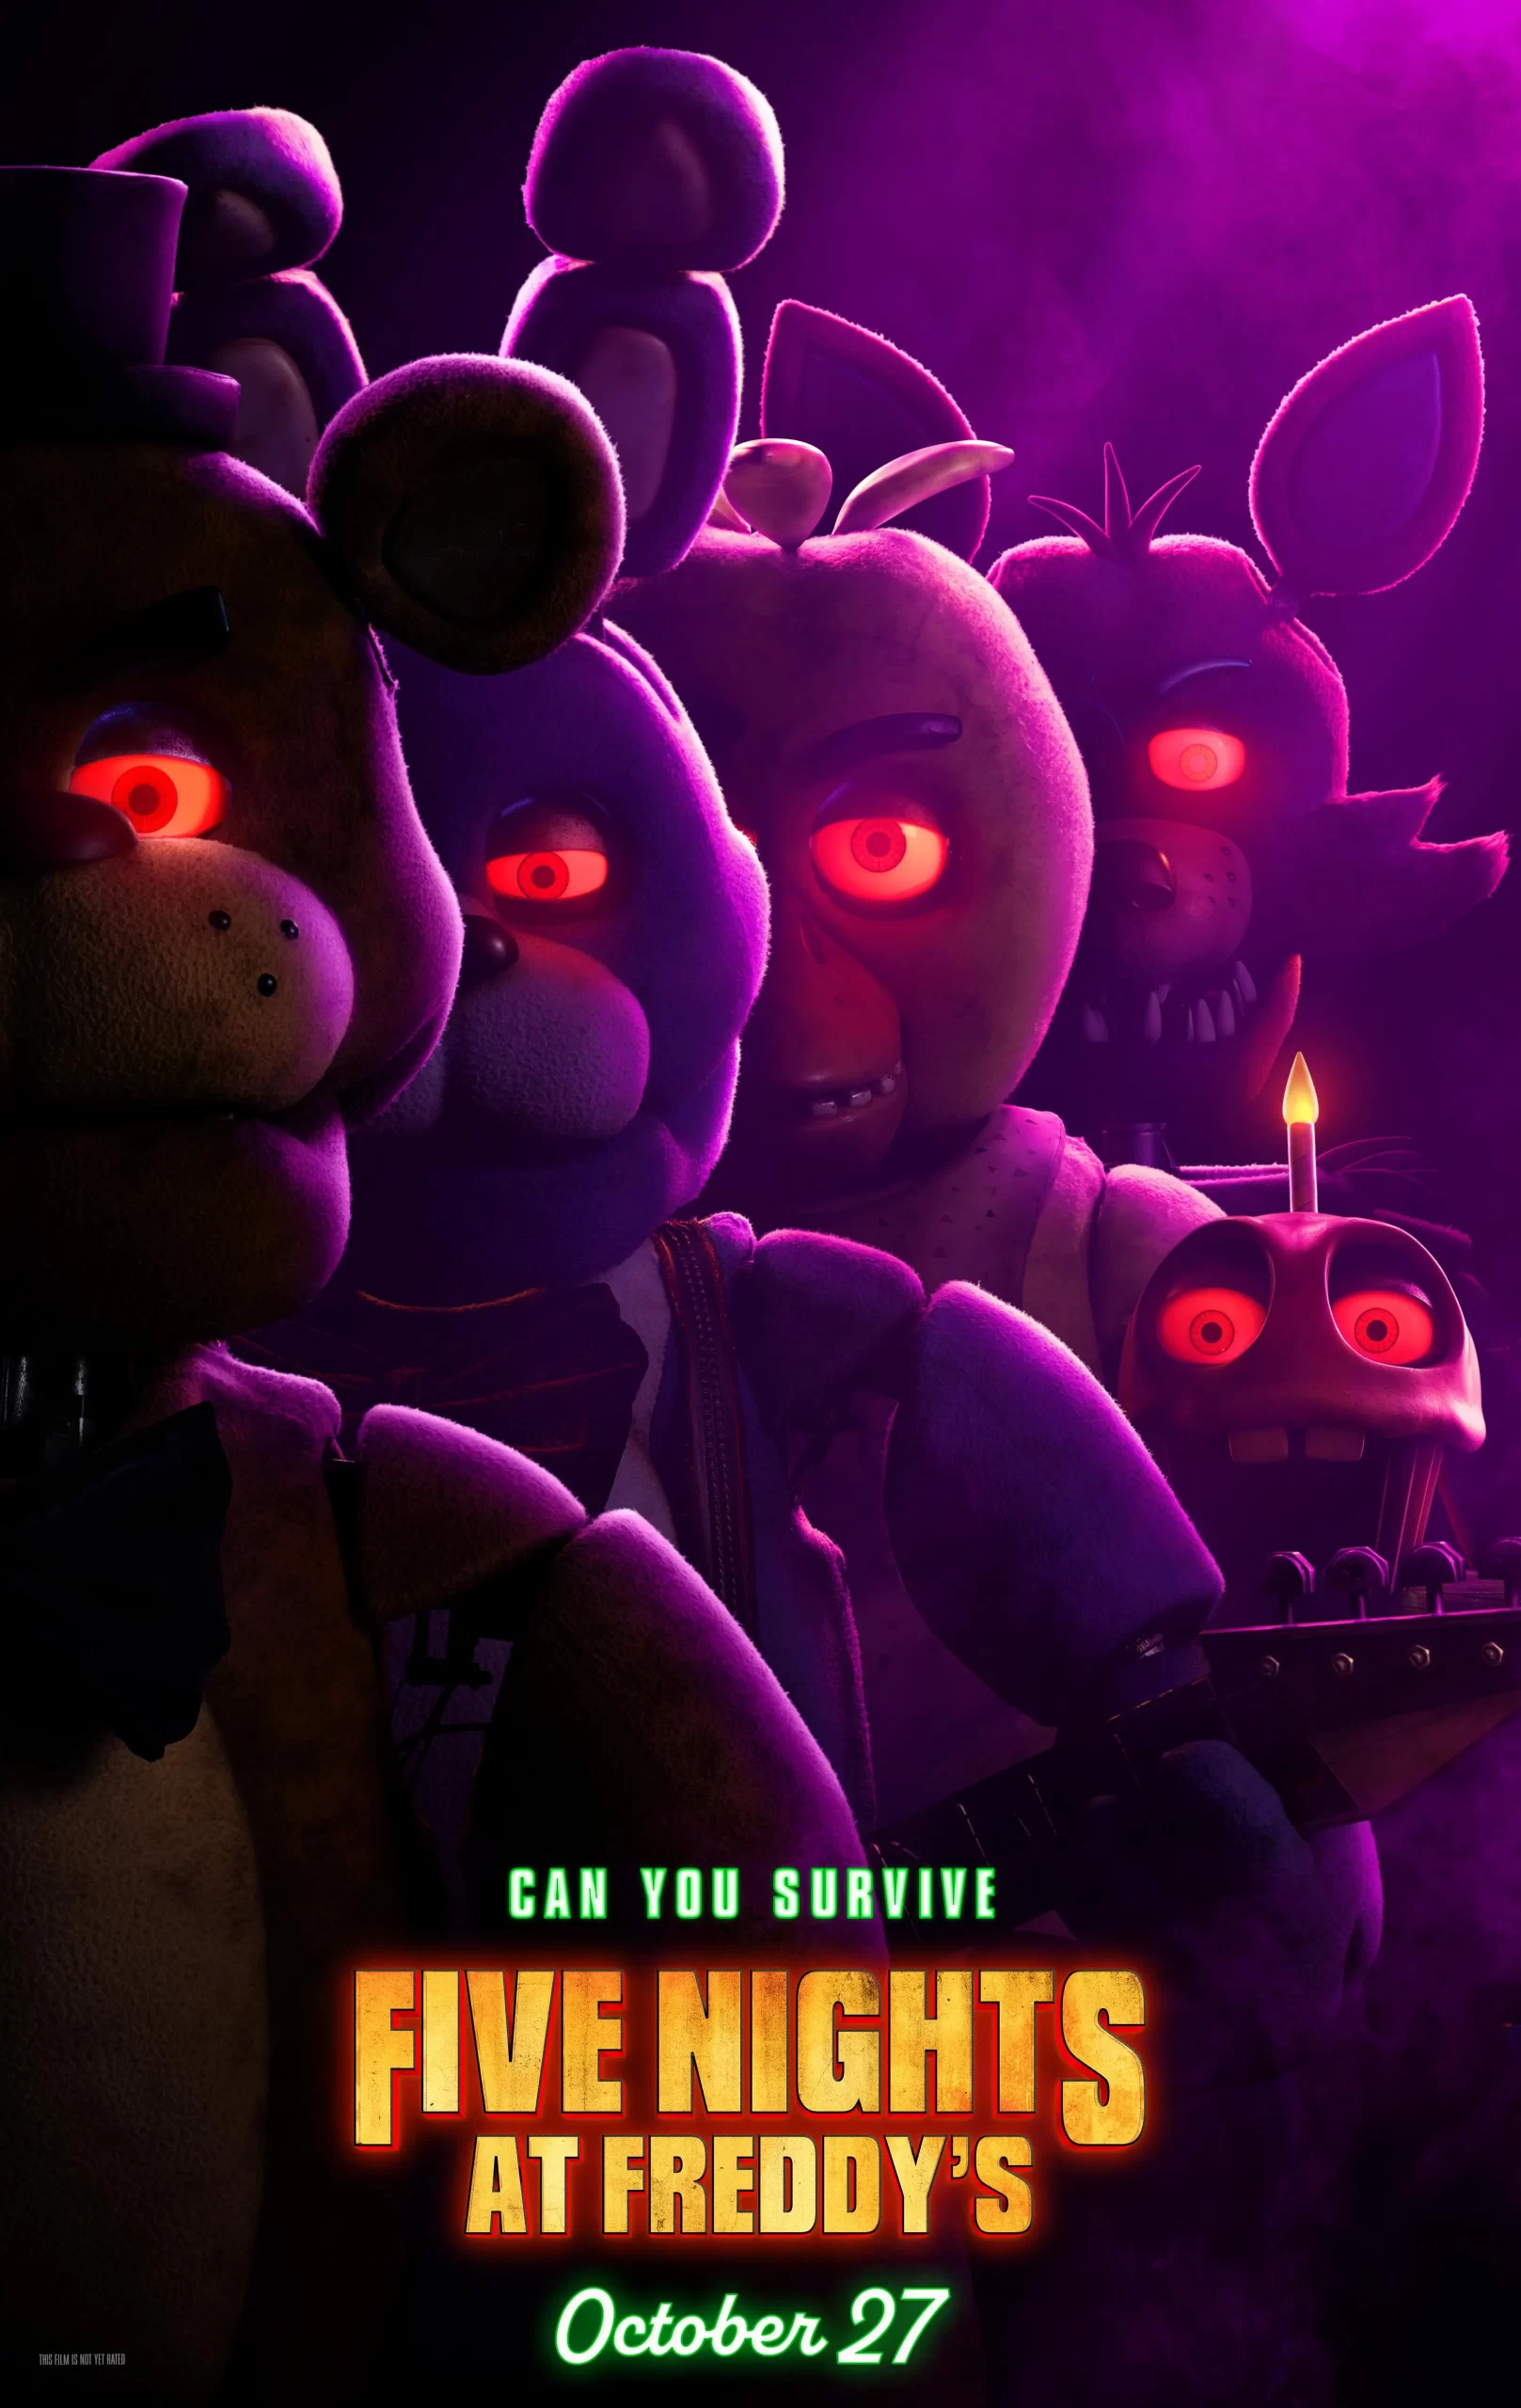 Animatronics glare at the viewer with glowing red eyes, a violet screen lights them up from the right side. Written below: Five Nights at Freddy's October 27